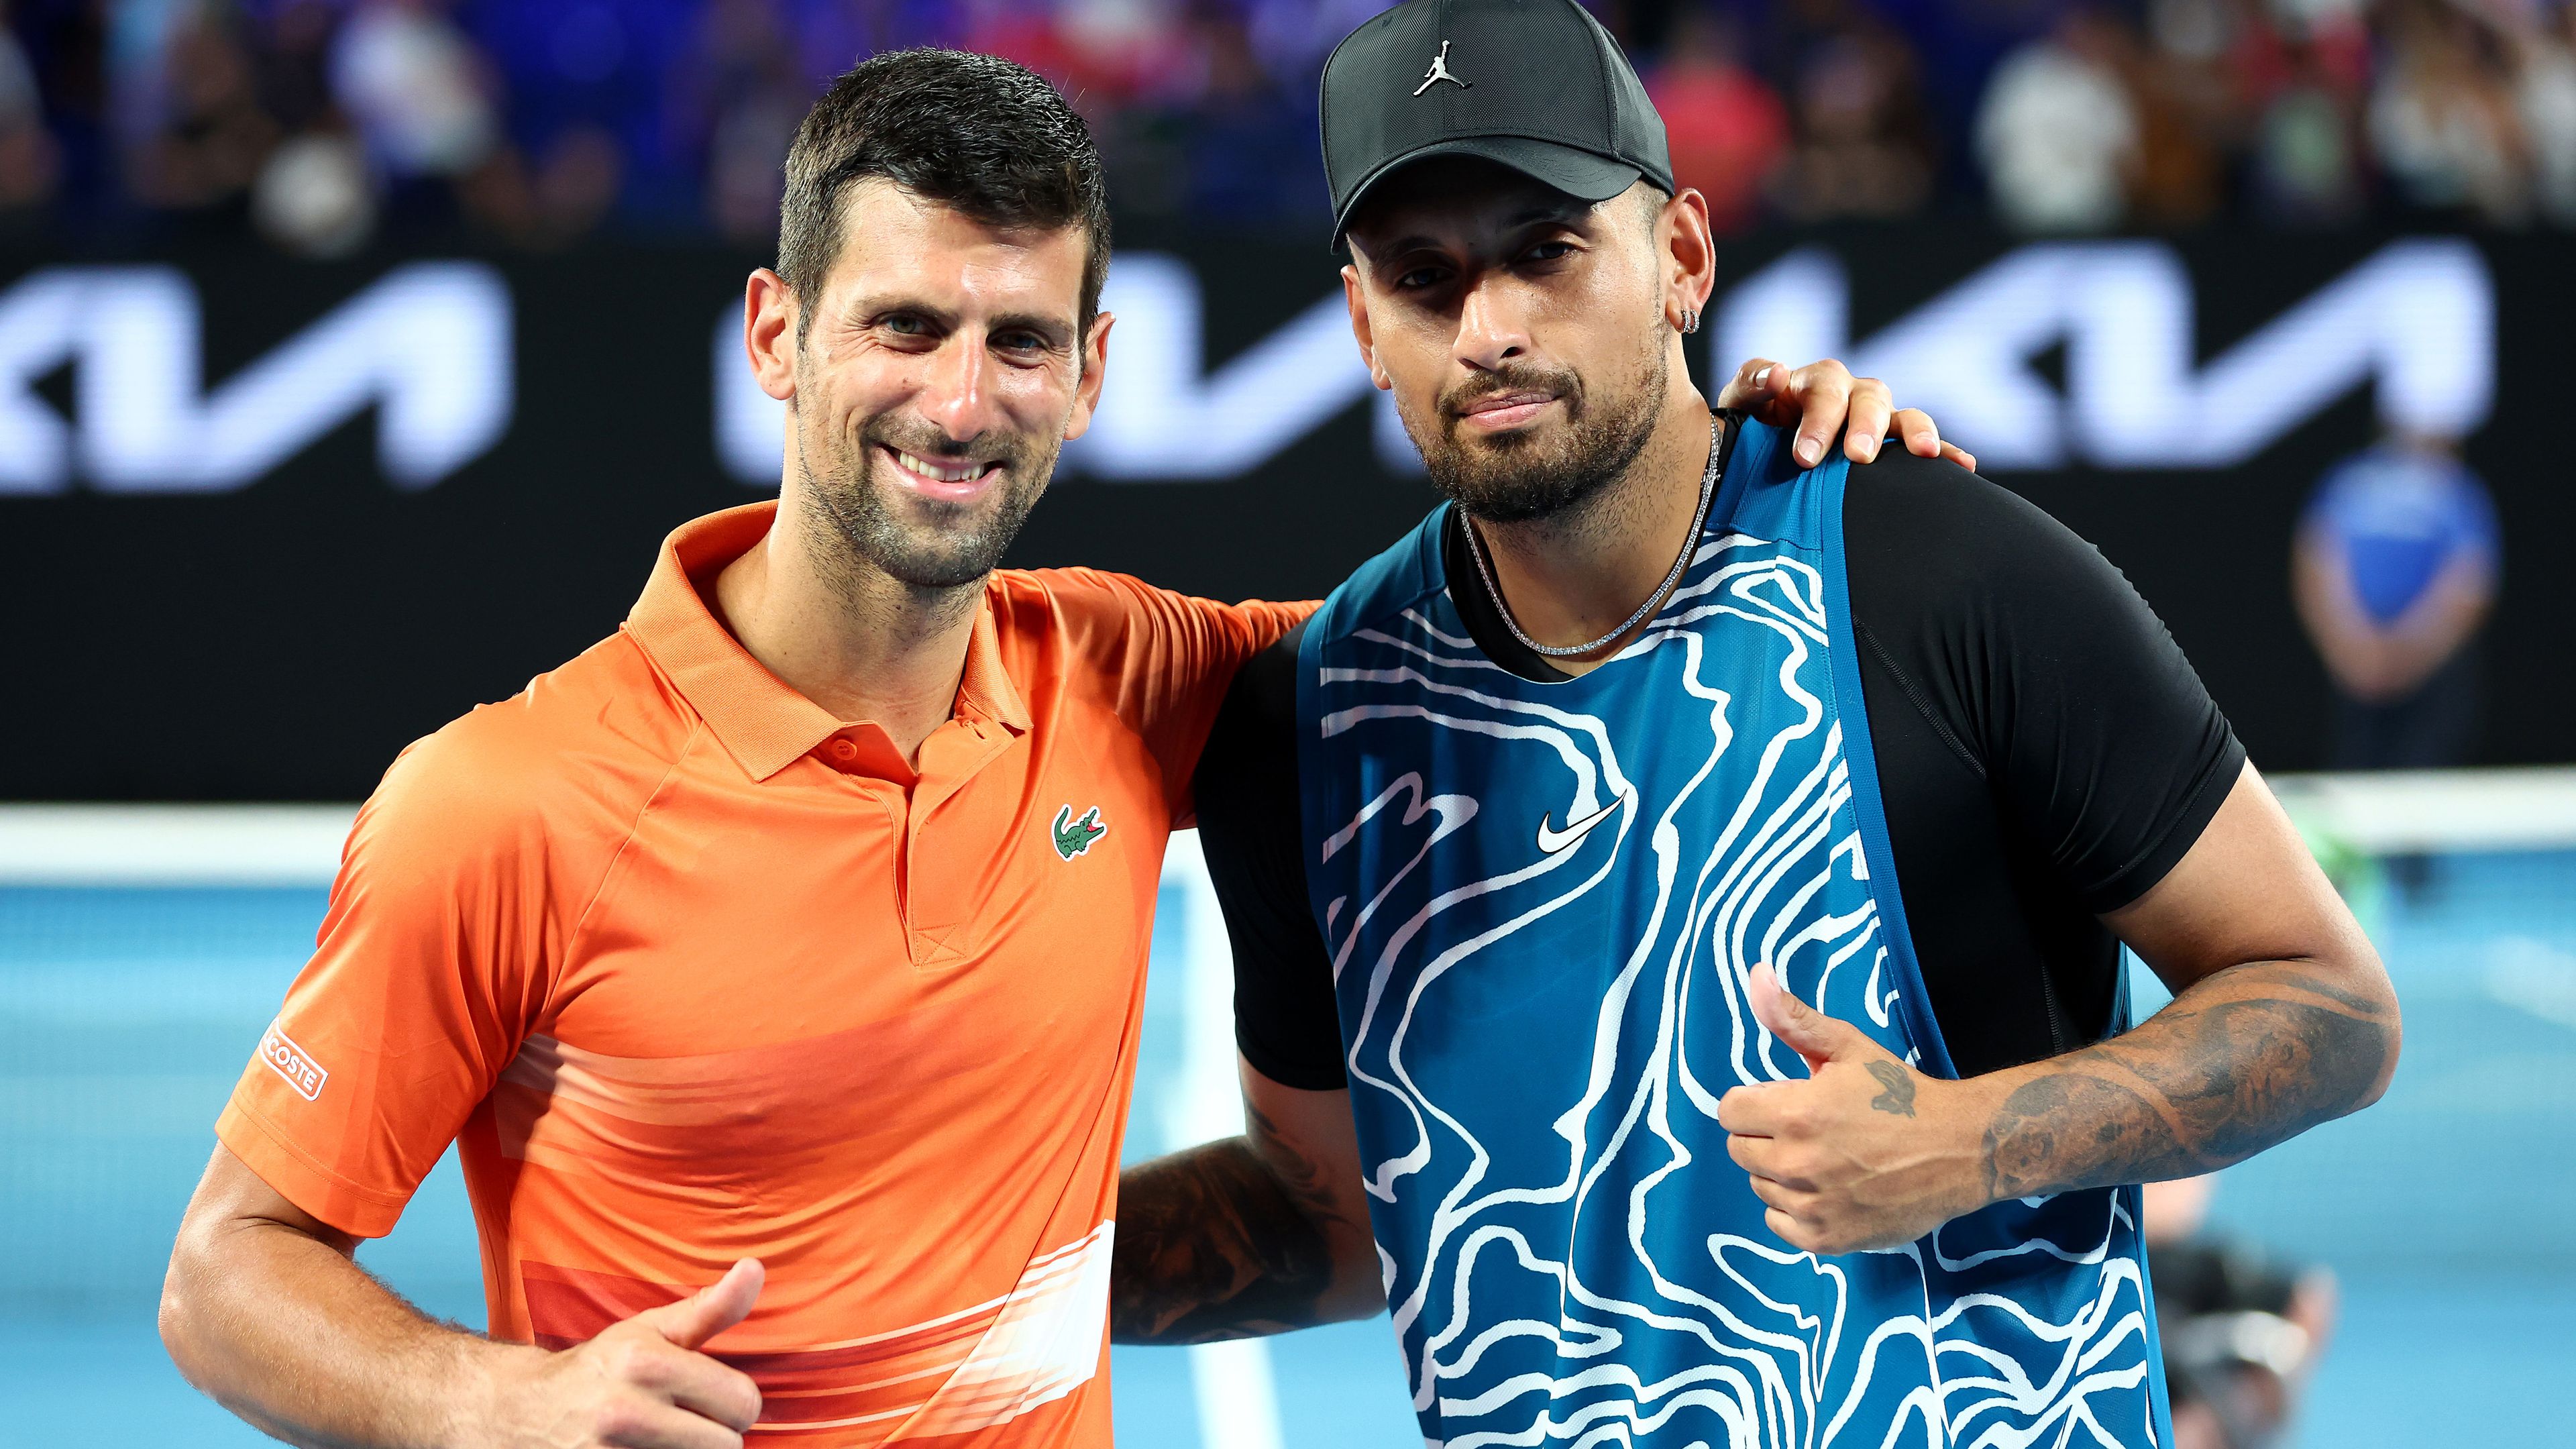 MELBOURNE, AUSTRALIA - JANUARY 13: Novak Djokovic of Serbia and Nick Kyrgios of Australia pose for a photo following their Arena Showdown charity match ahead of the 2023 Australian Open at Melbourne Park on January 13, 2023 in Melbourne, Australia. (Photo by Graham Denholm/Getty Images)